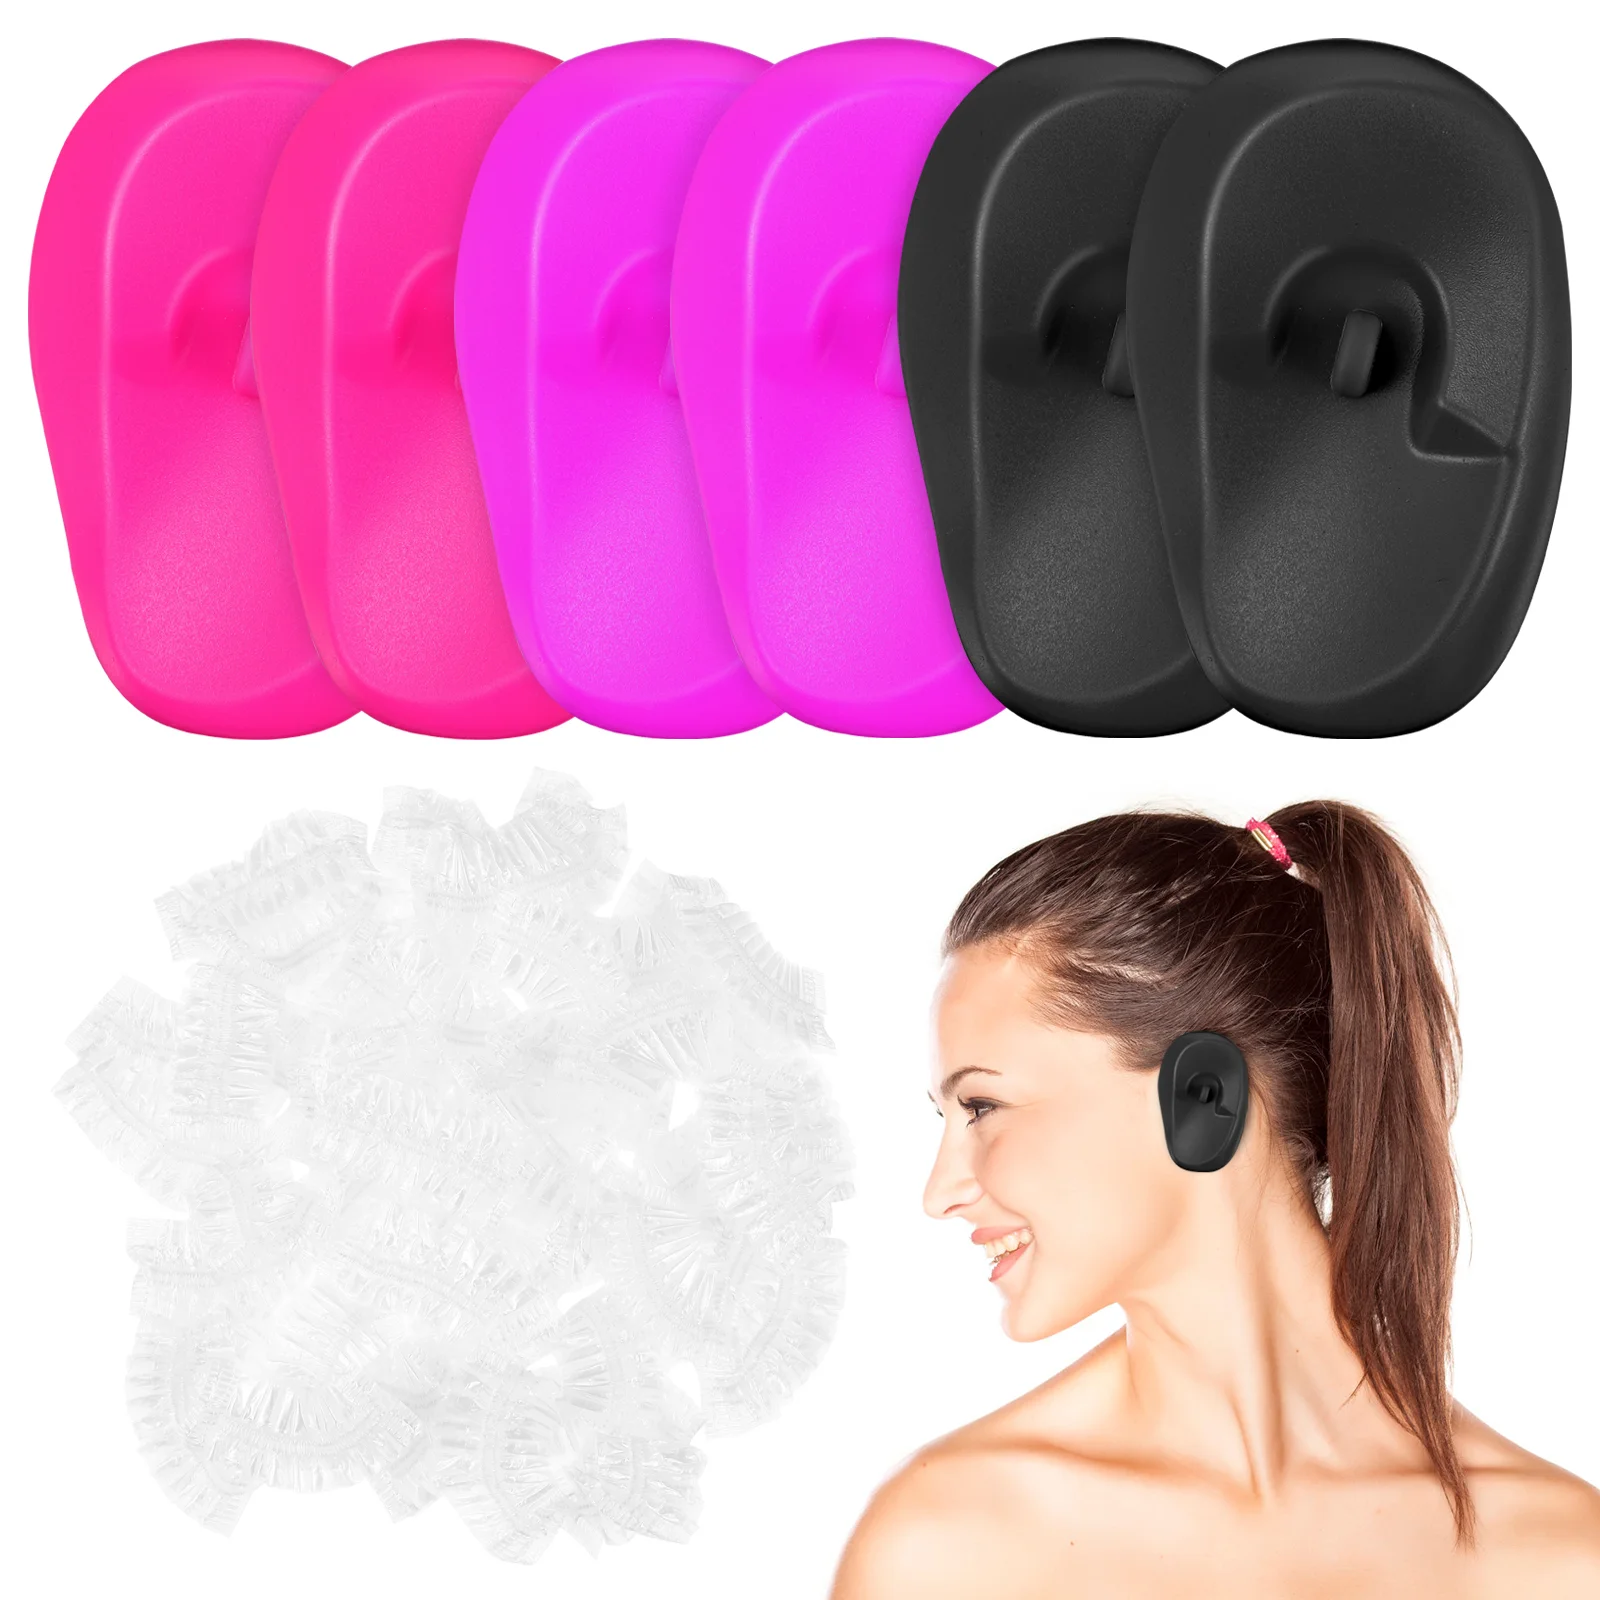 

Ear Covers Shower Hairprotector Caps Dye Cover Protectors Disposable Hairdressing Capsilicone Swimmingcoloring Bathing Bathroom